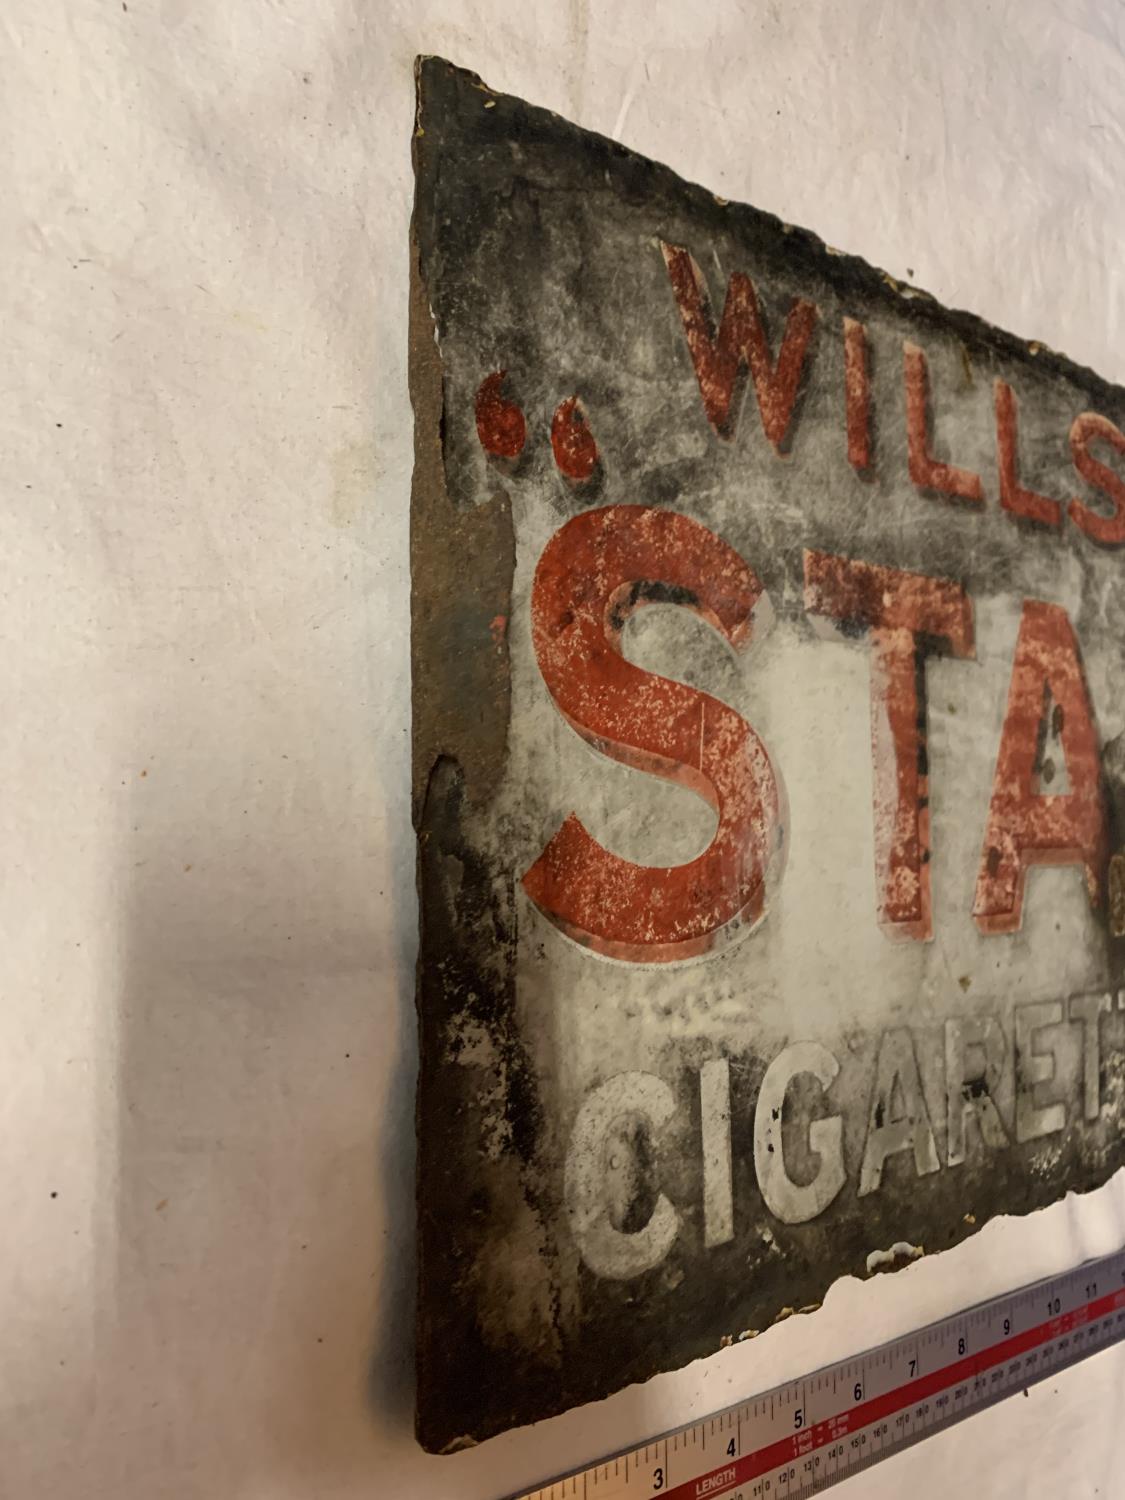 A VINTAGE DOUBLE-SIDED METAL ADVERTISING SIGN ' WILLIS'S WILD WOODBINE CIGARETTES' - Image 3 of 4